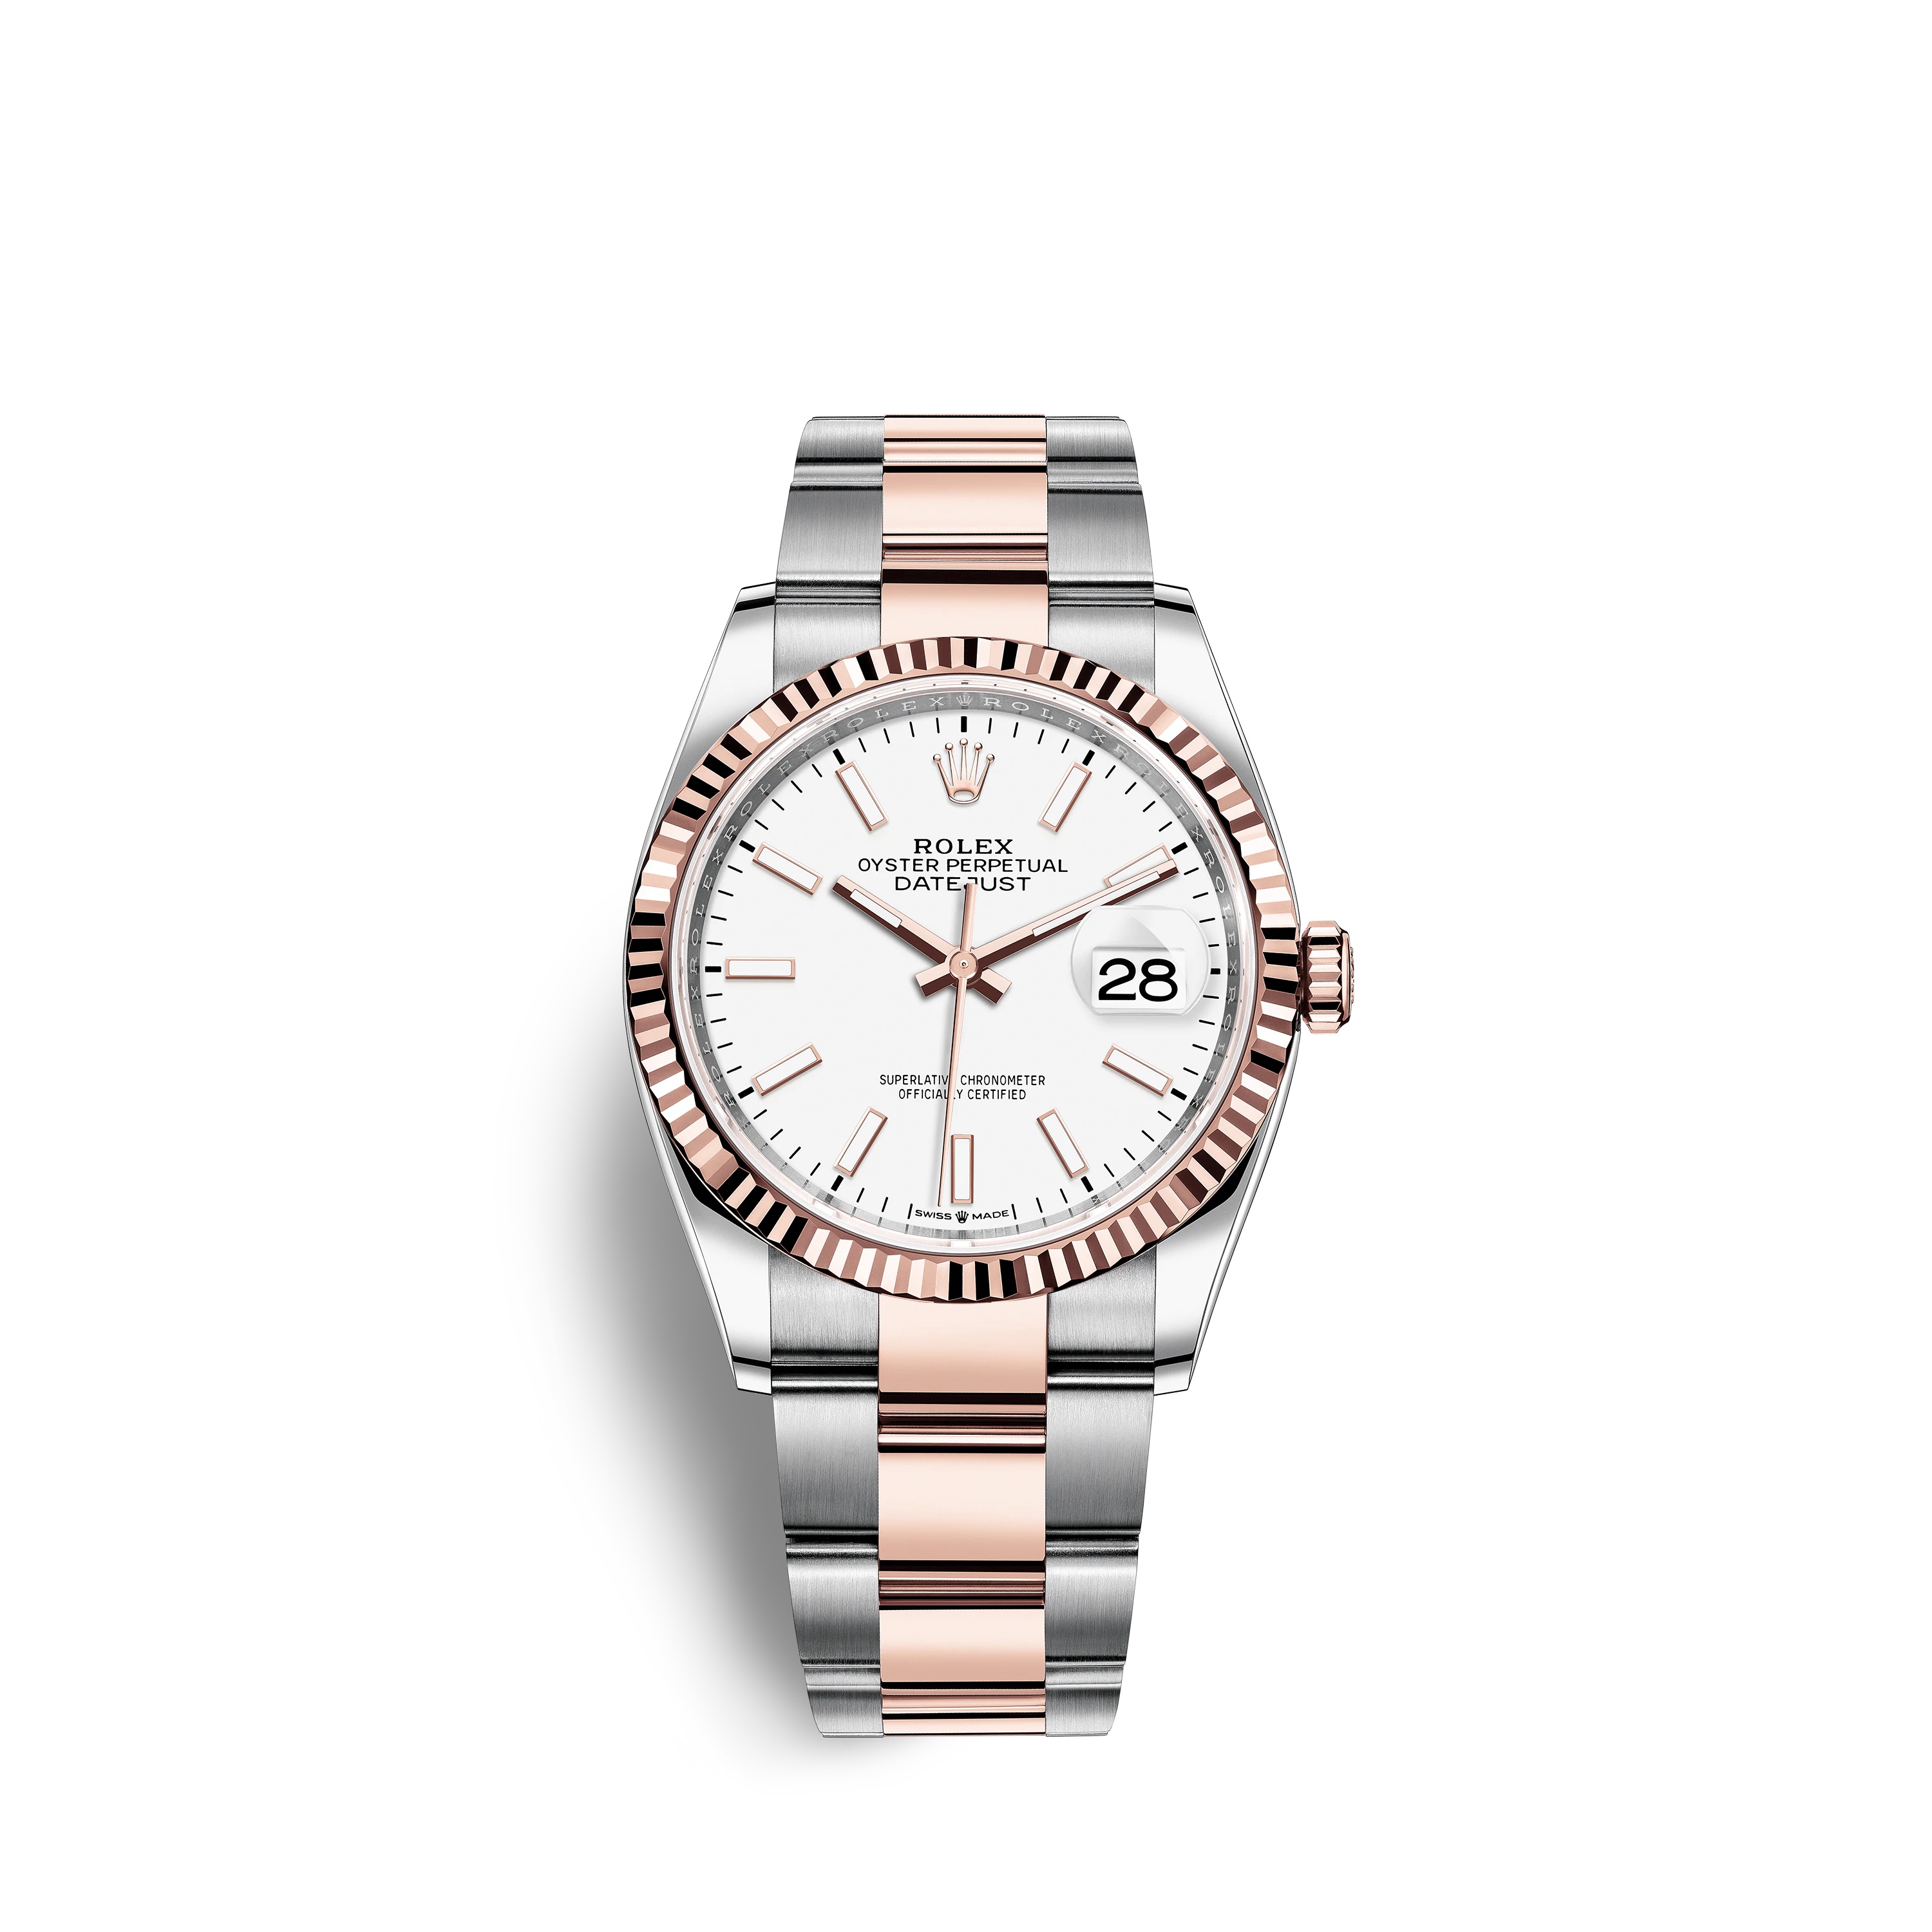 Datejust 36 126231 Rose Gold & Stainless Steel Watch (White)